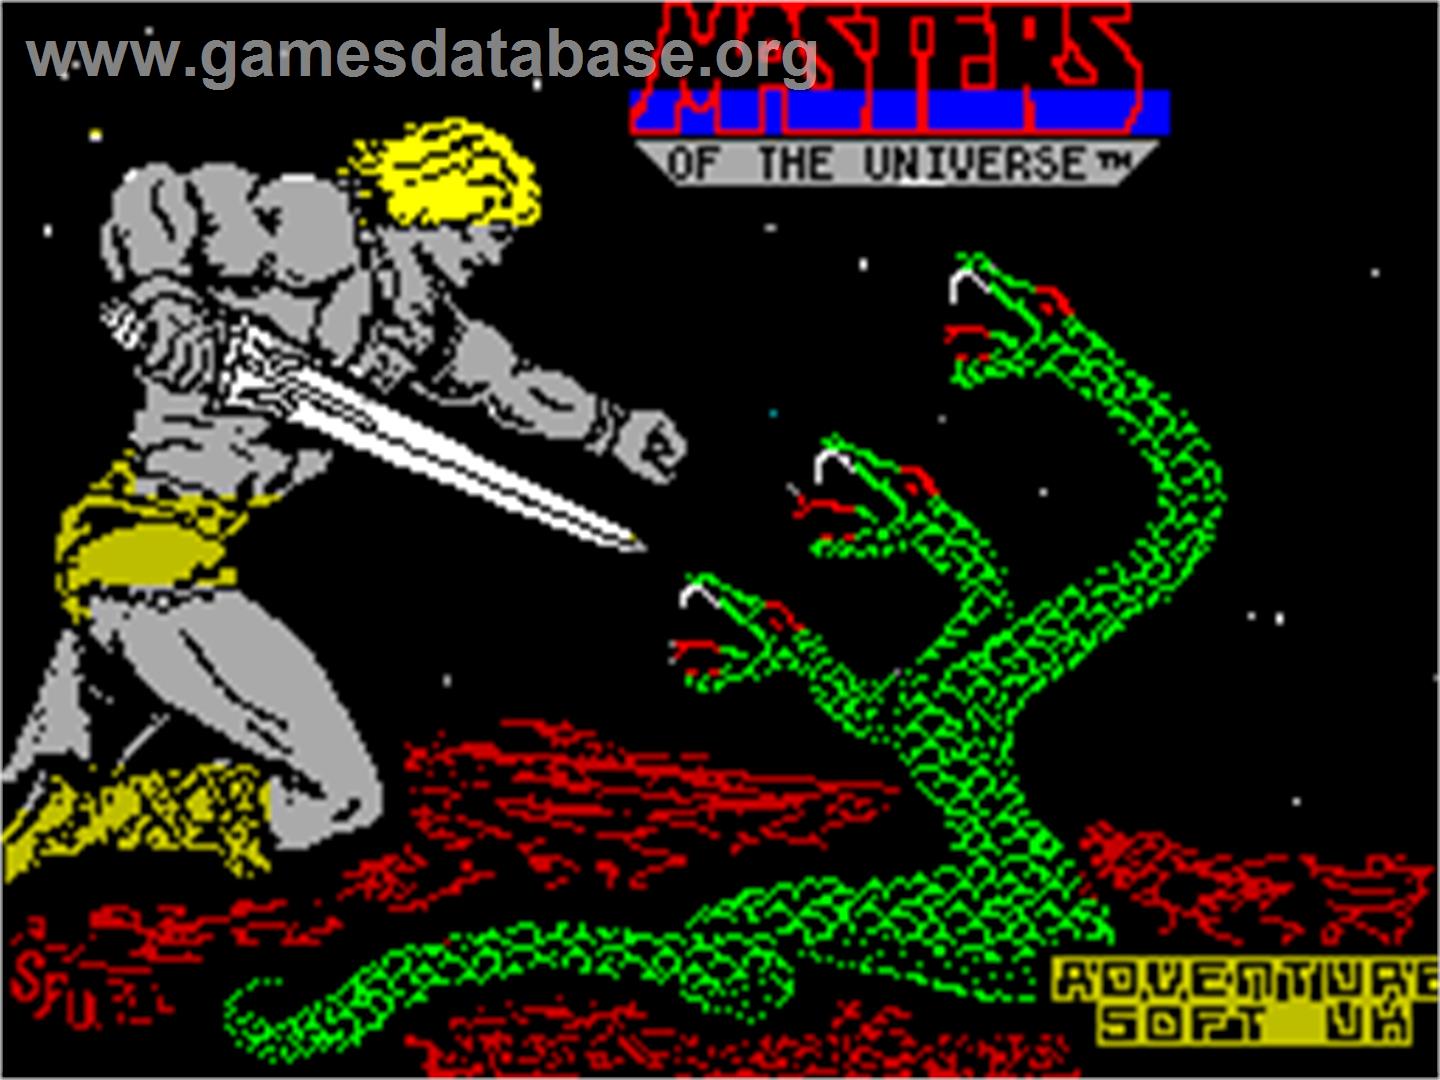 Tales of the Unknown, Volume I: The Bard's Tale - Sinclair ZX Spectrum - Artwork - Title Screen